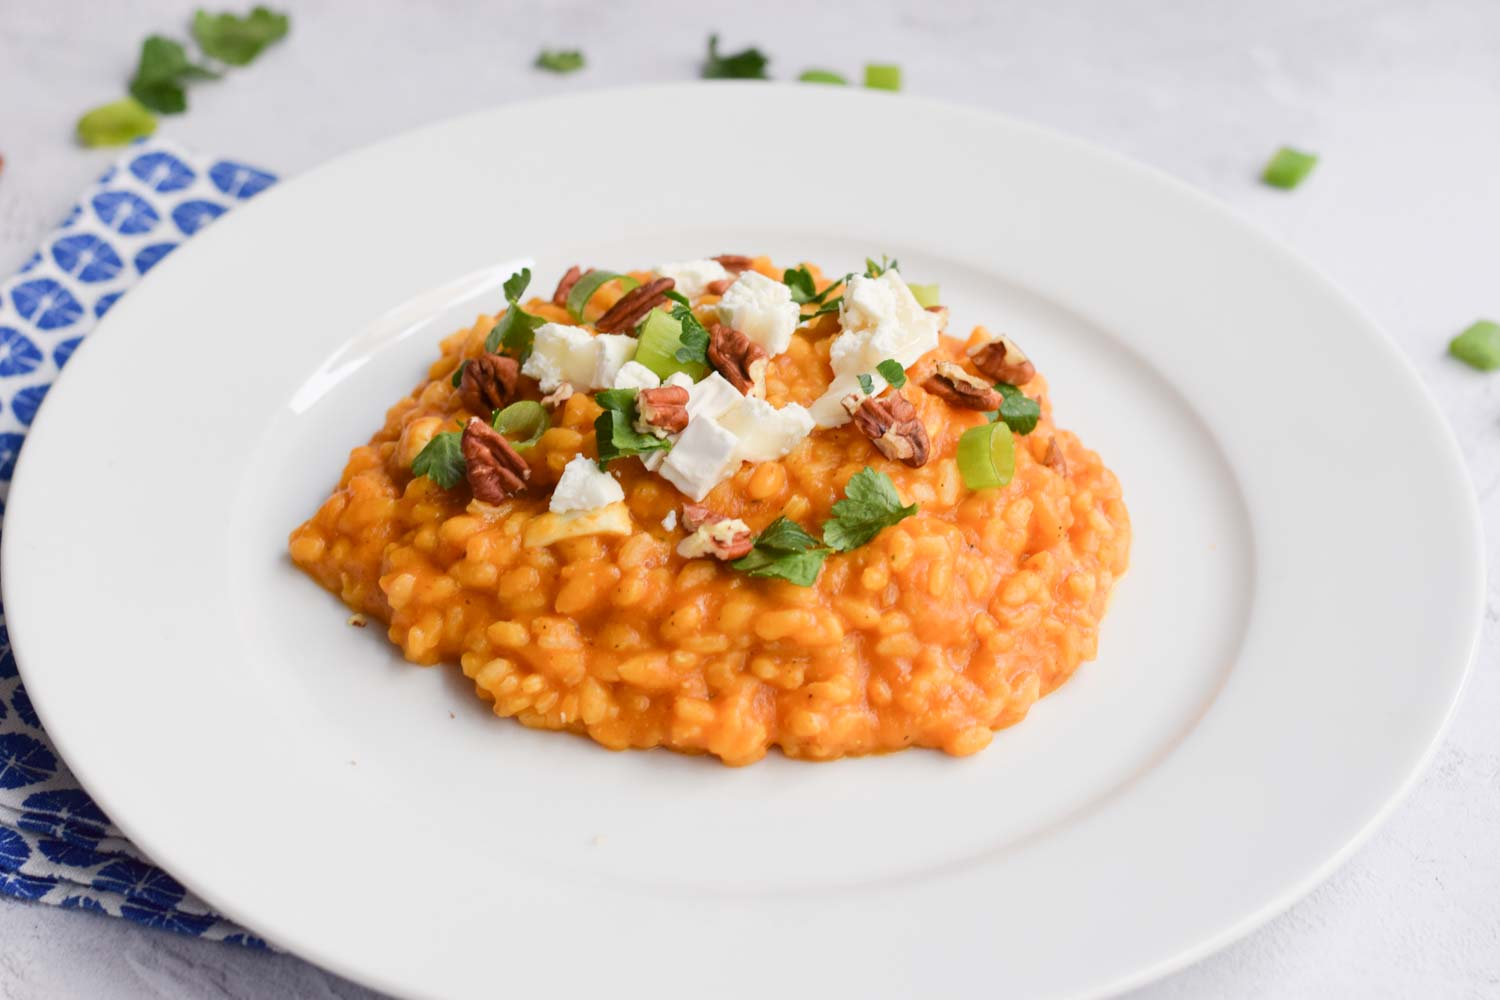 Low FODMAP pumpkin risotto with goat cheese